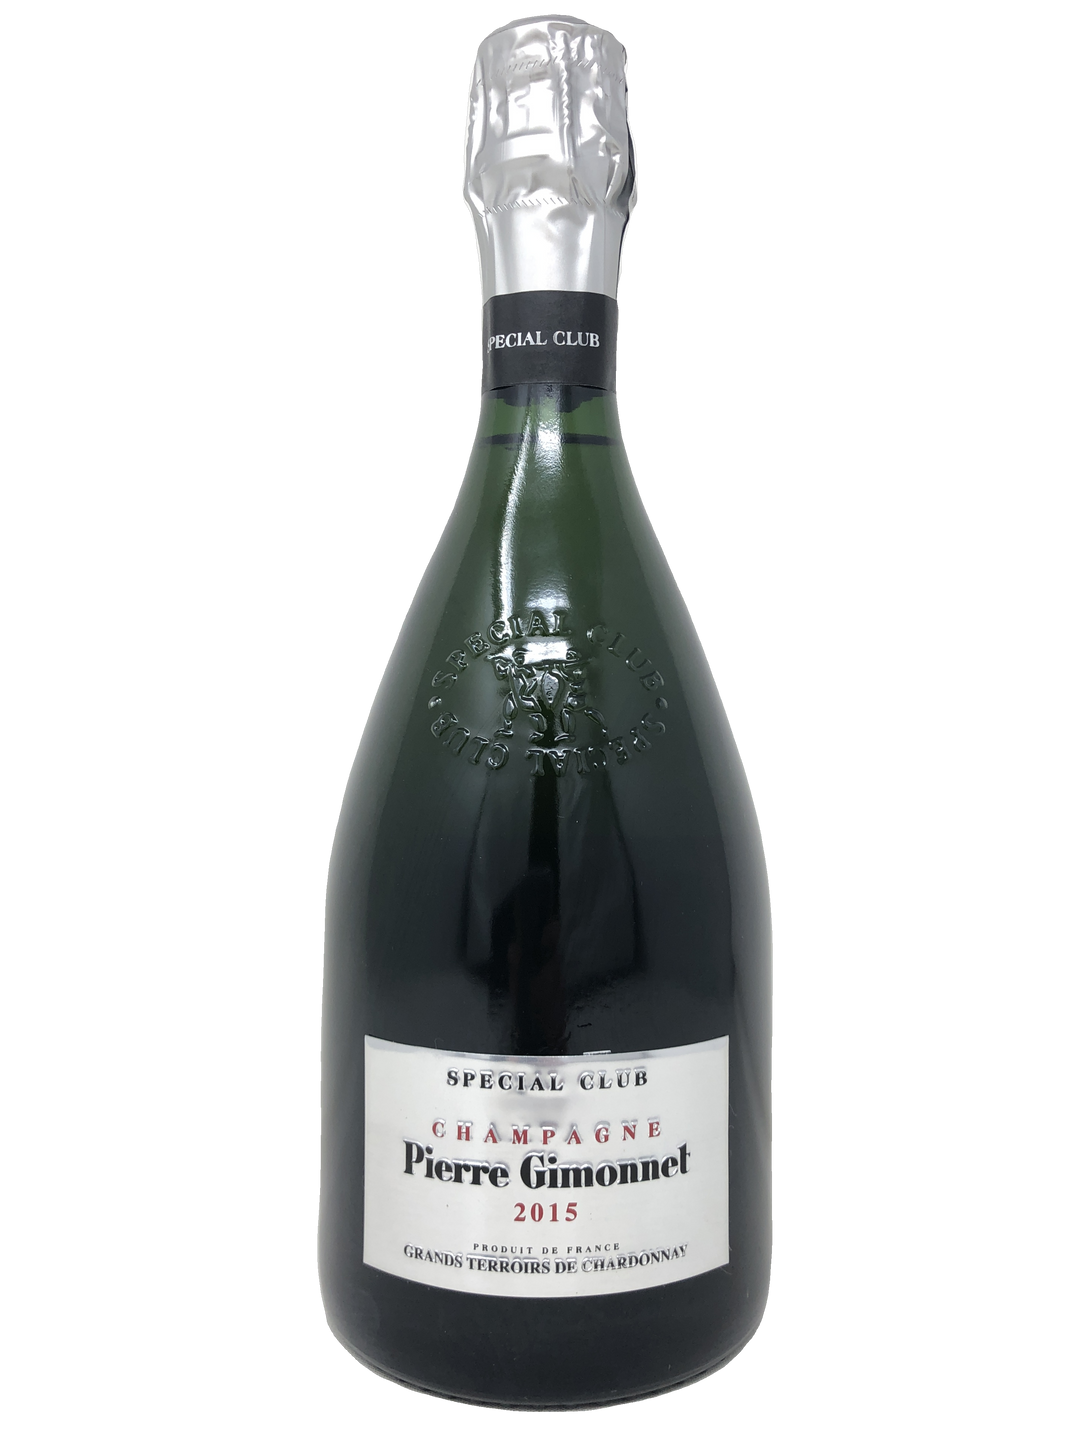 Champagne Pierre Gimonnet "Special Club" 2015